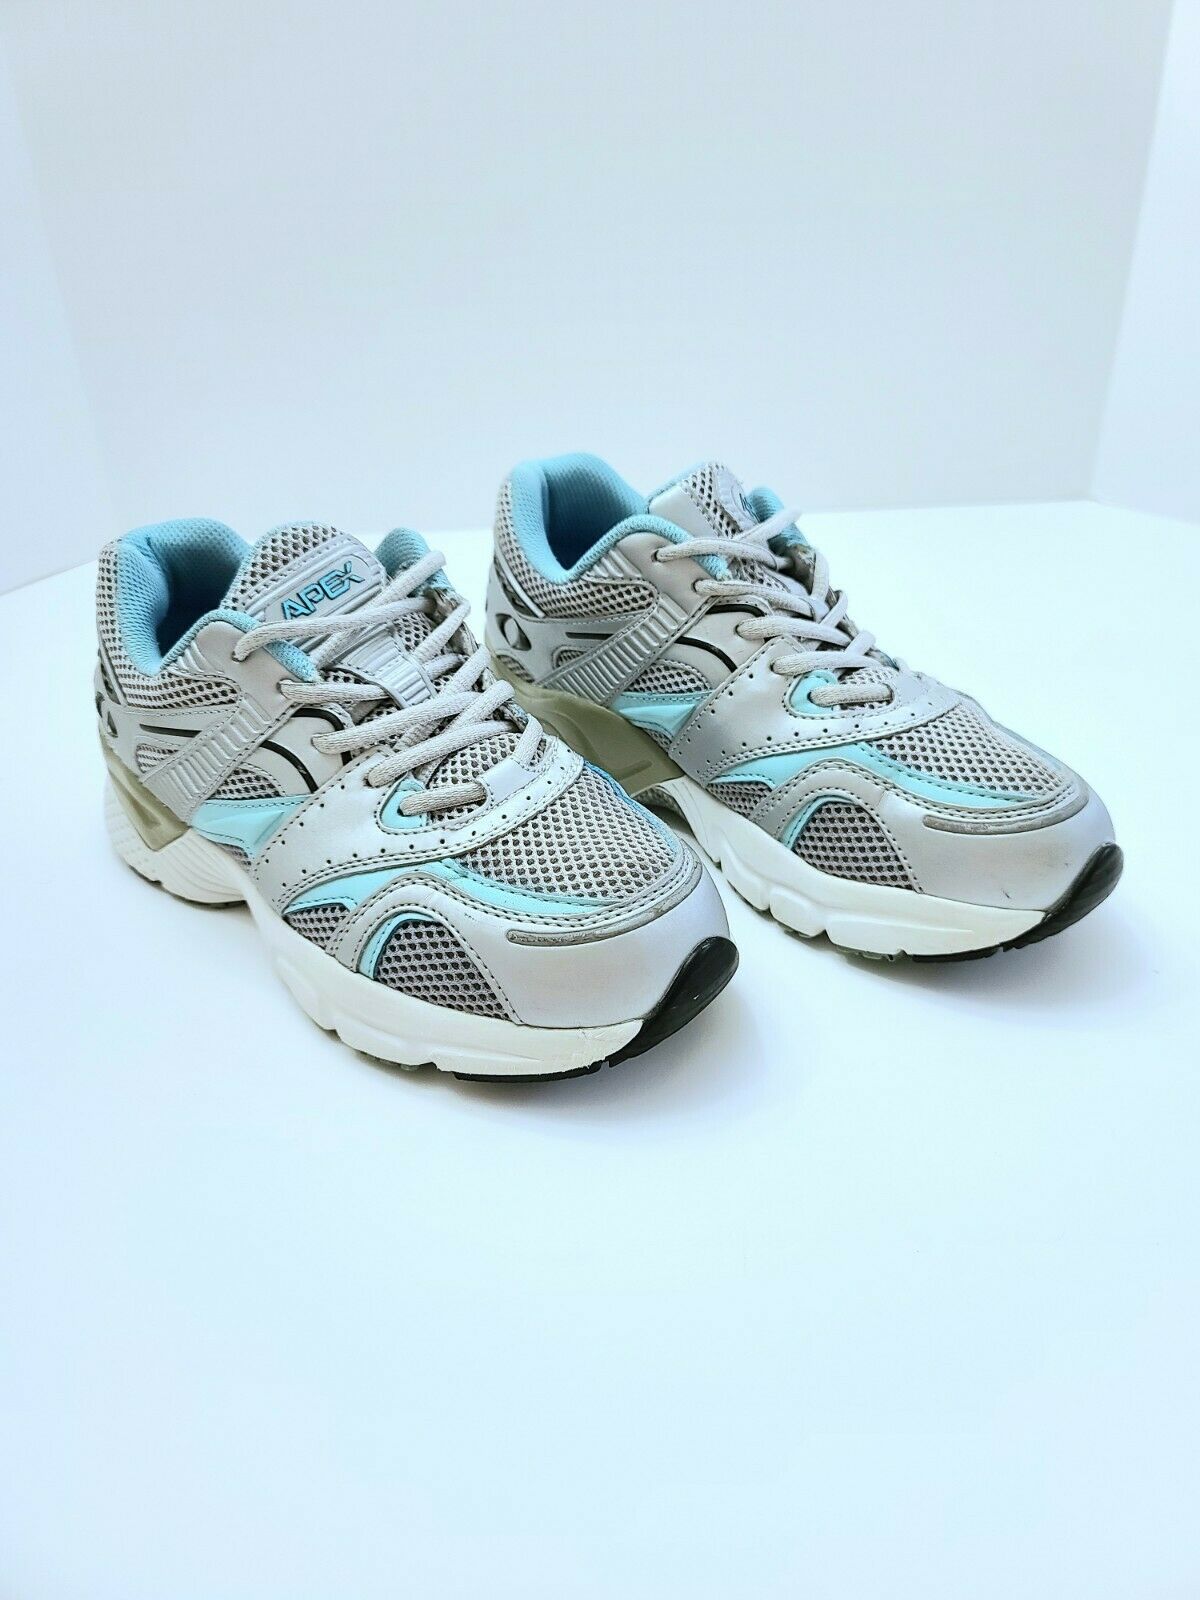 Womens Size 7 Wide Apex X527 Boss Runner Motion Control Running Shoes